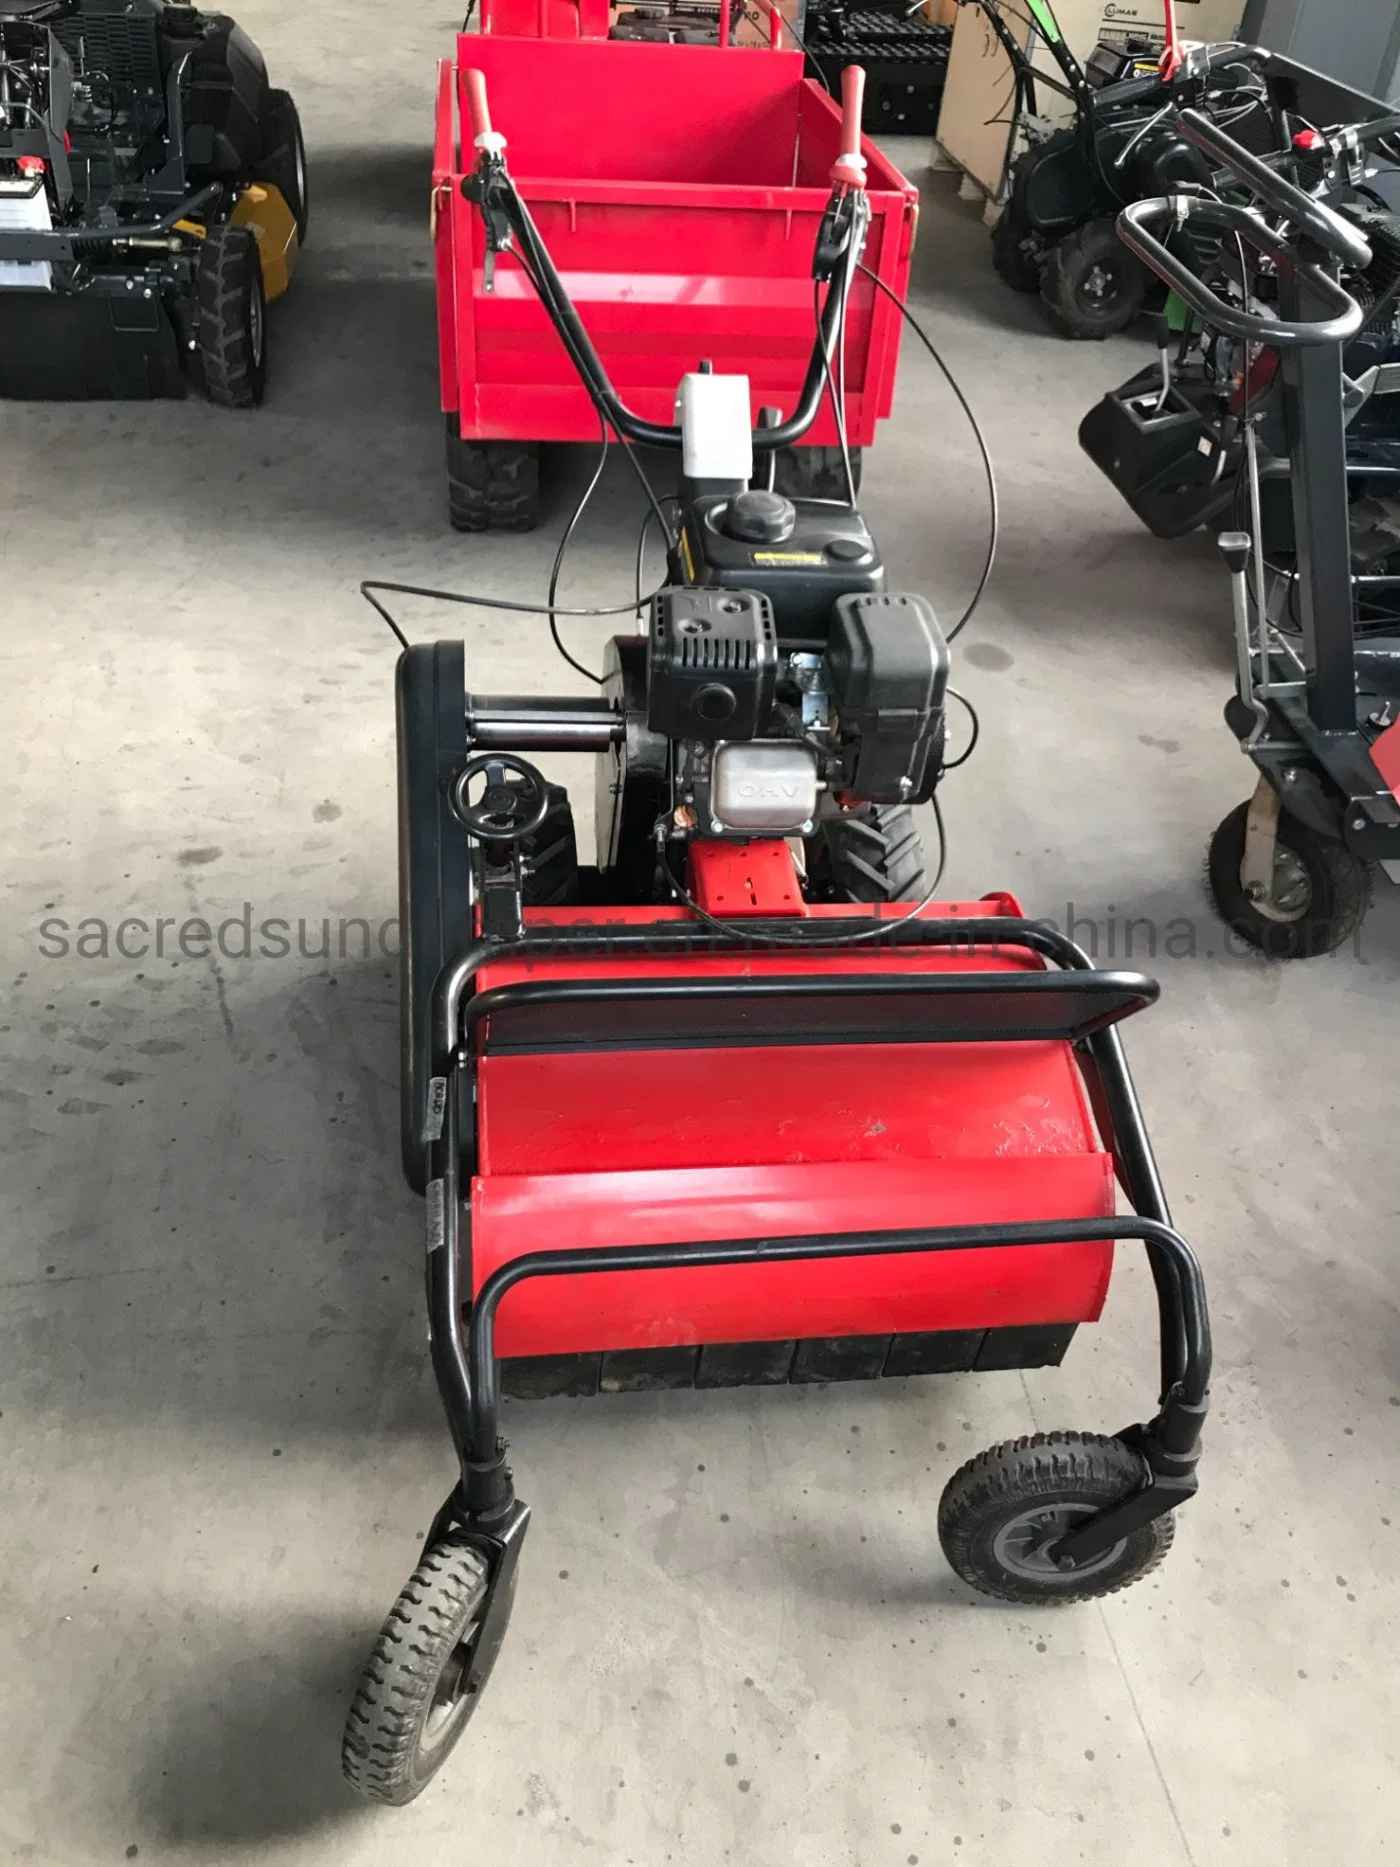 8HP Lawn Mower Grass Mower Mower Grass Trimmer Rotary Mower Weed Cutter Self Propelled with High Quality